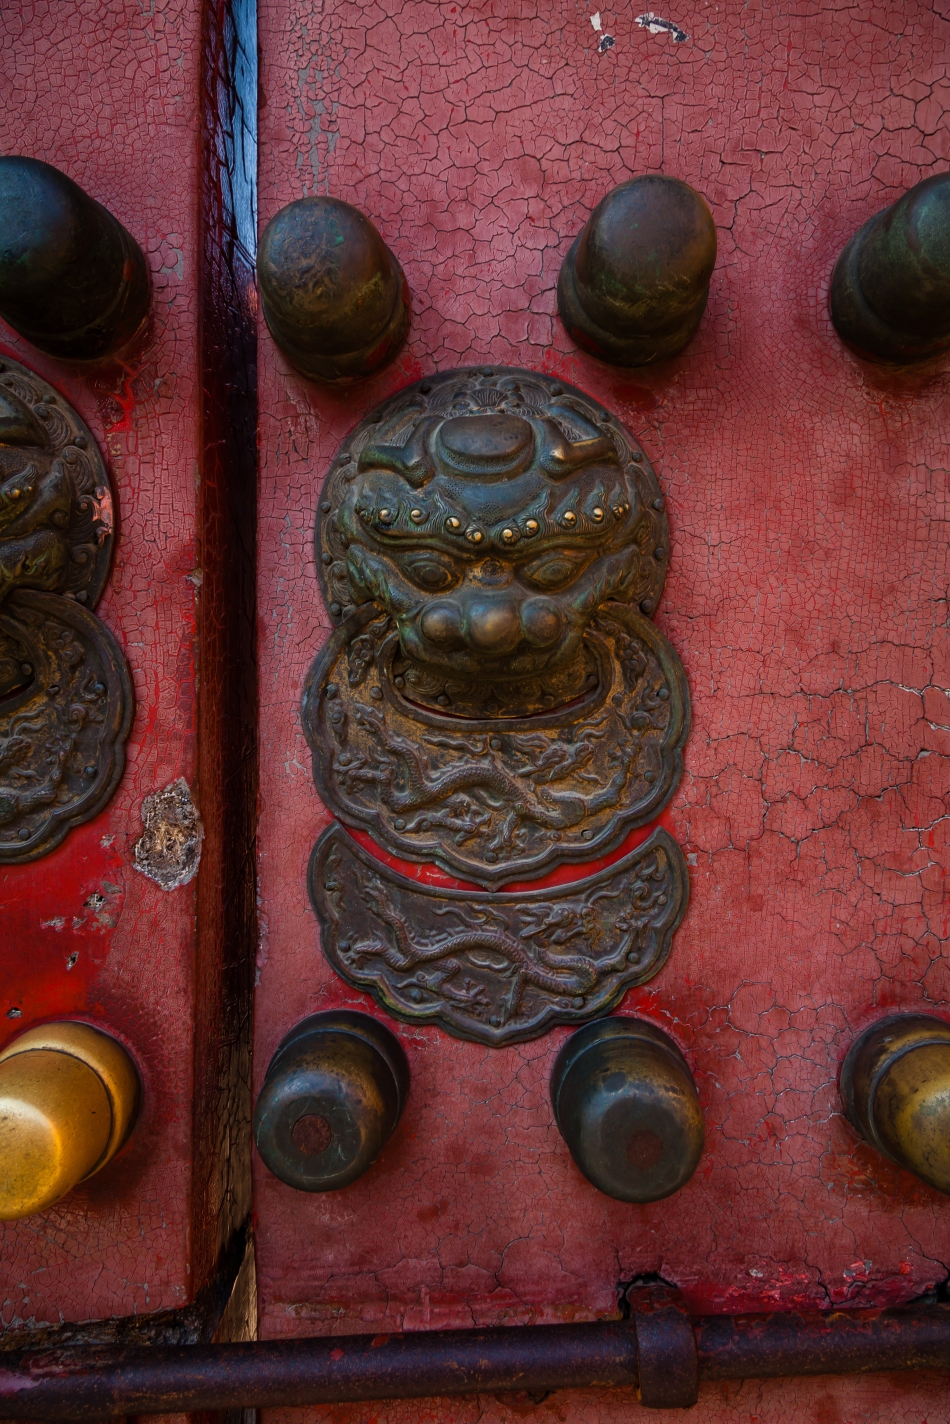 A door handle of one of the thousands of gates inside the forbidden city.